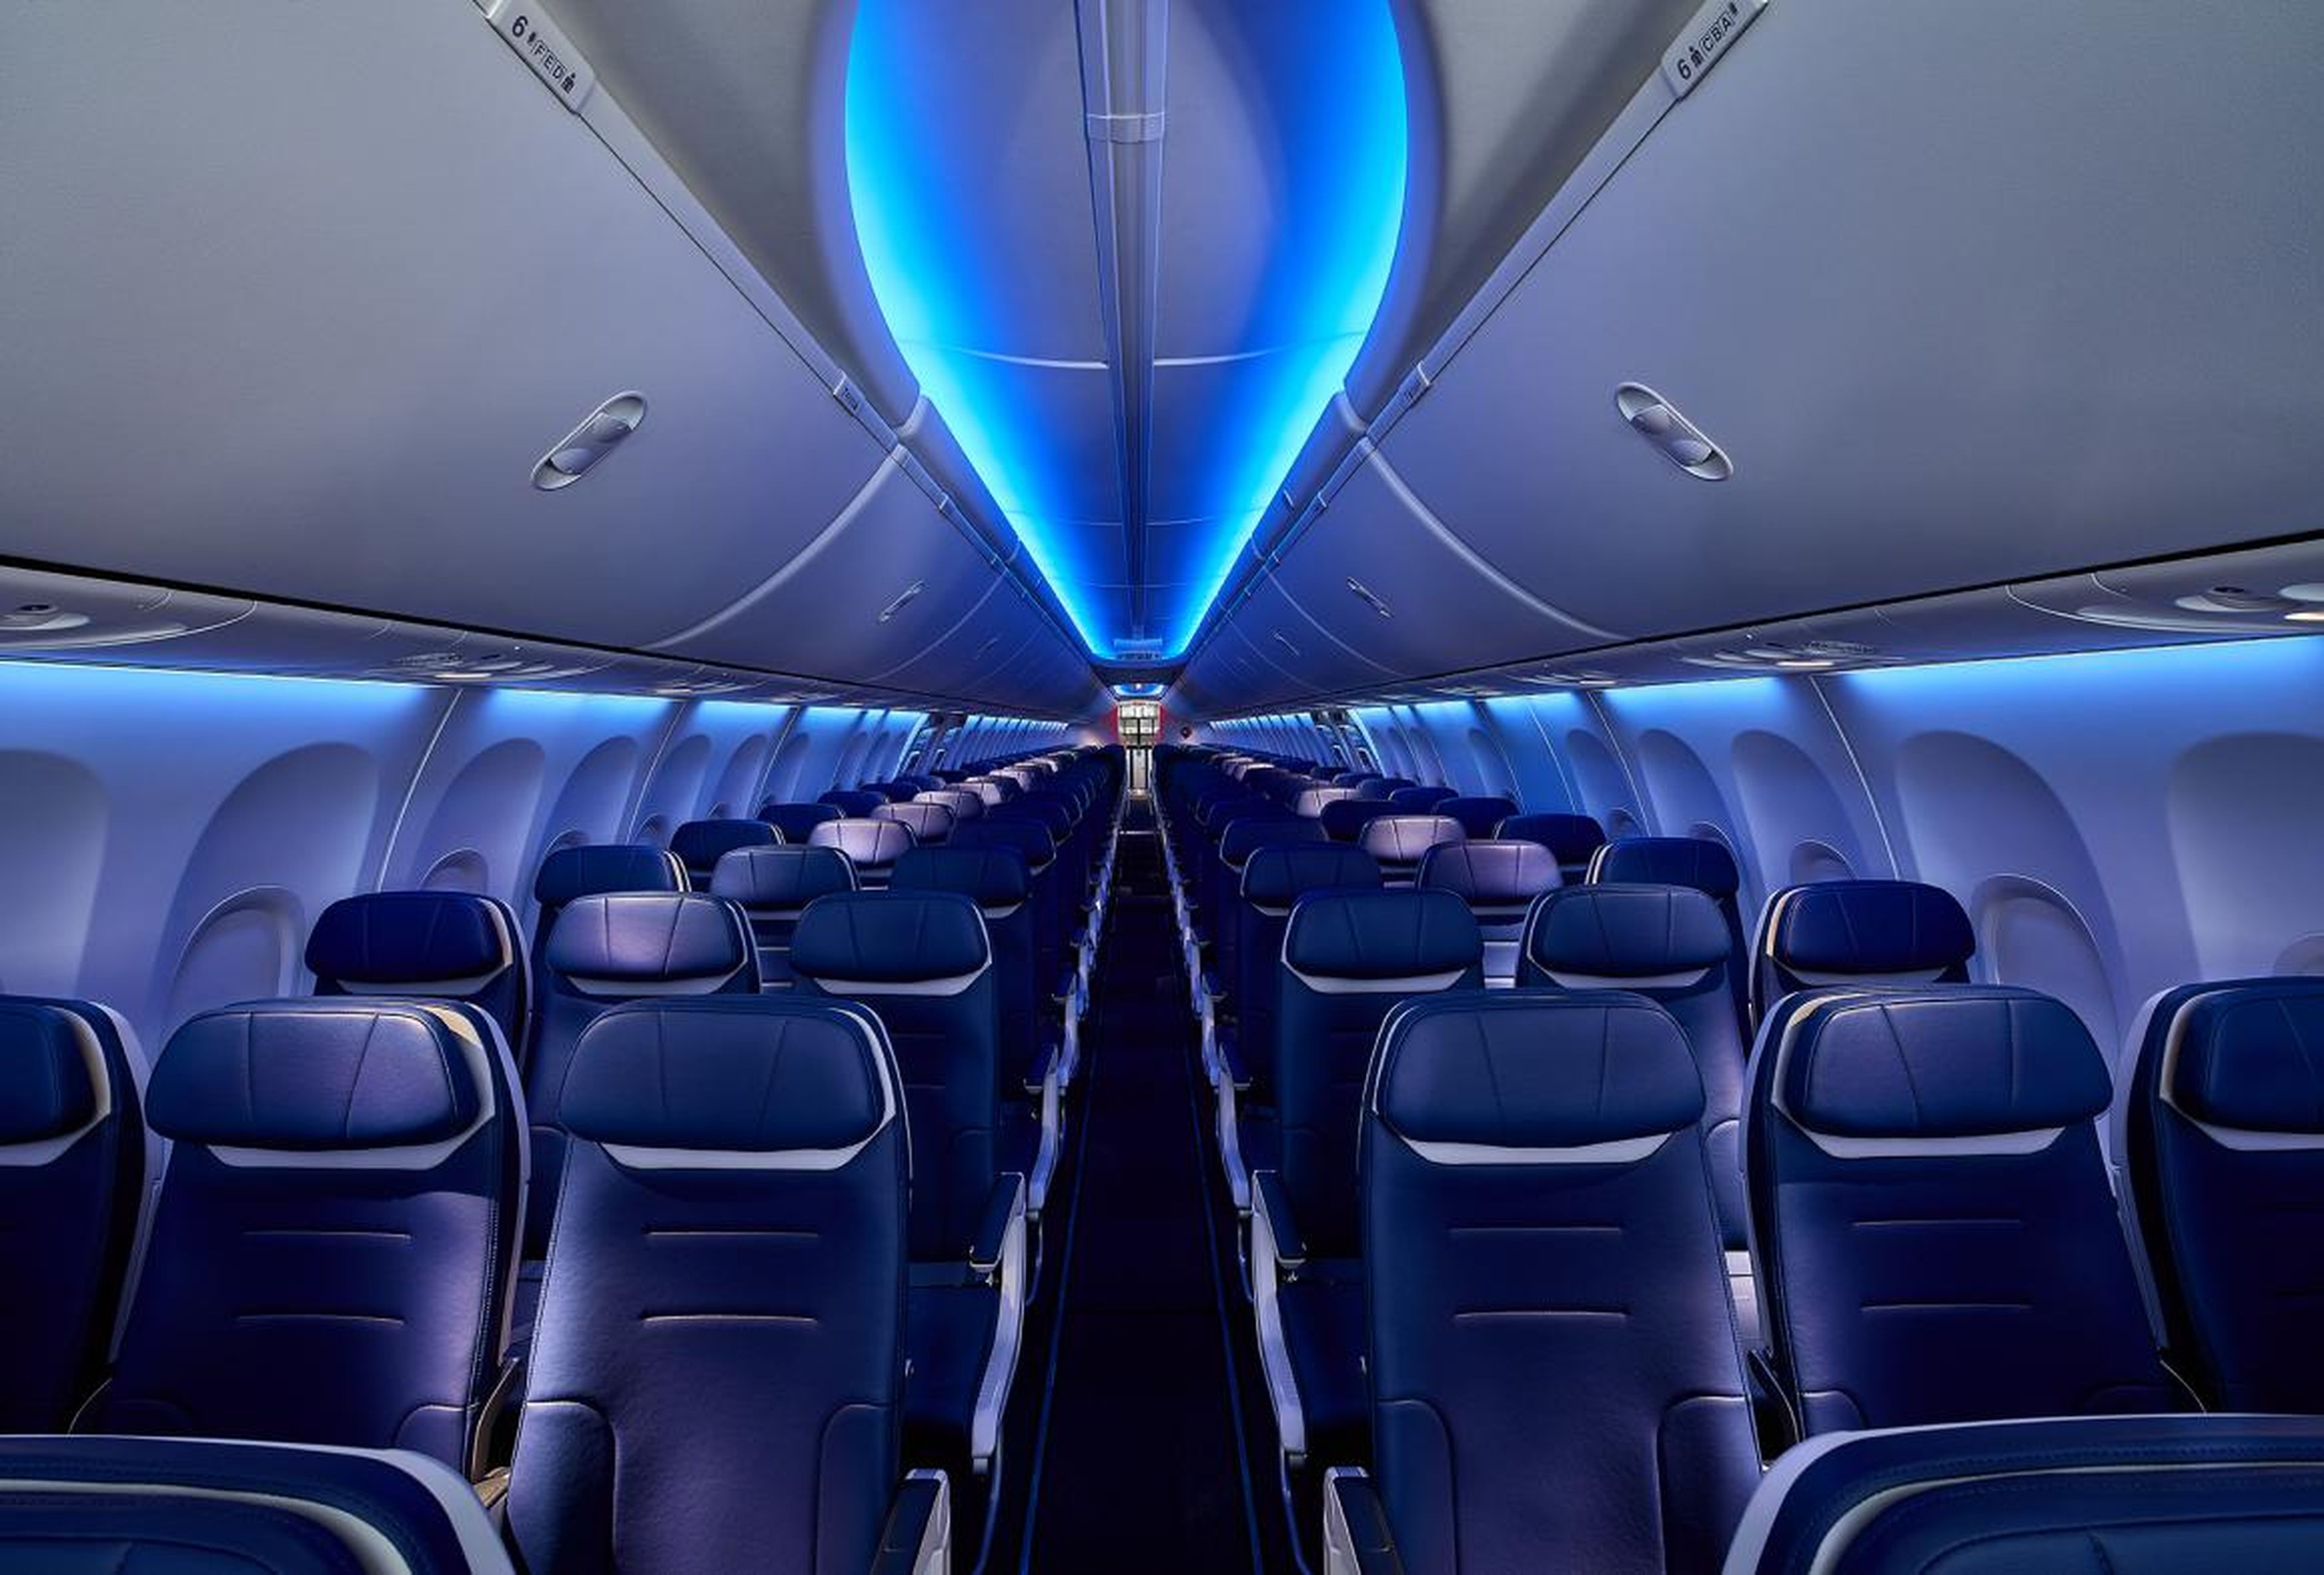 Incredibly, Boeing has not changed the fuselage width of its narrow-body airliners. The modern Boeing 737 Max has the same 148-inch width six seats per row configuration.